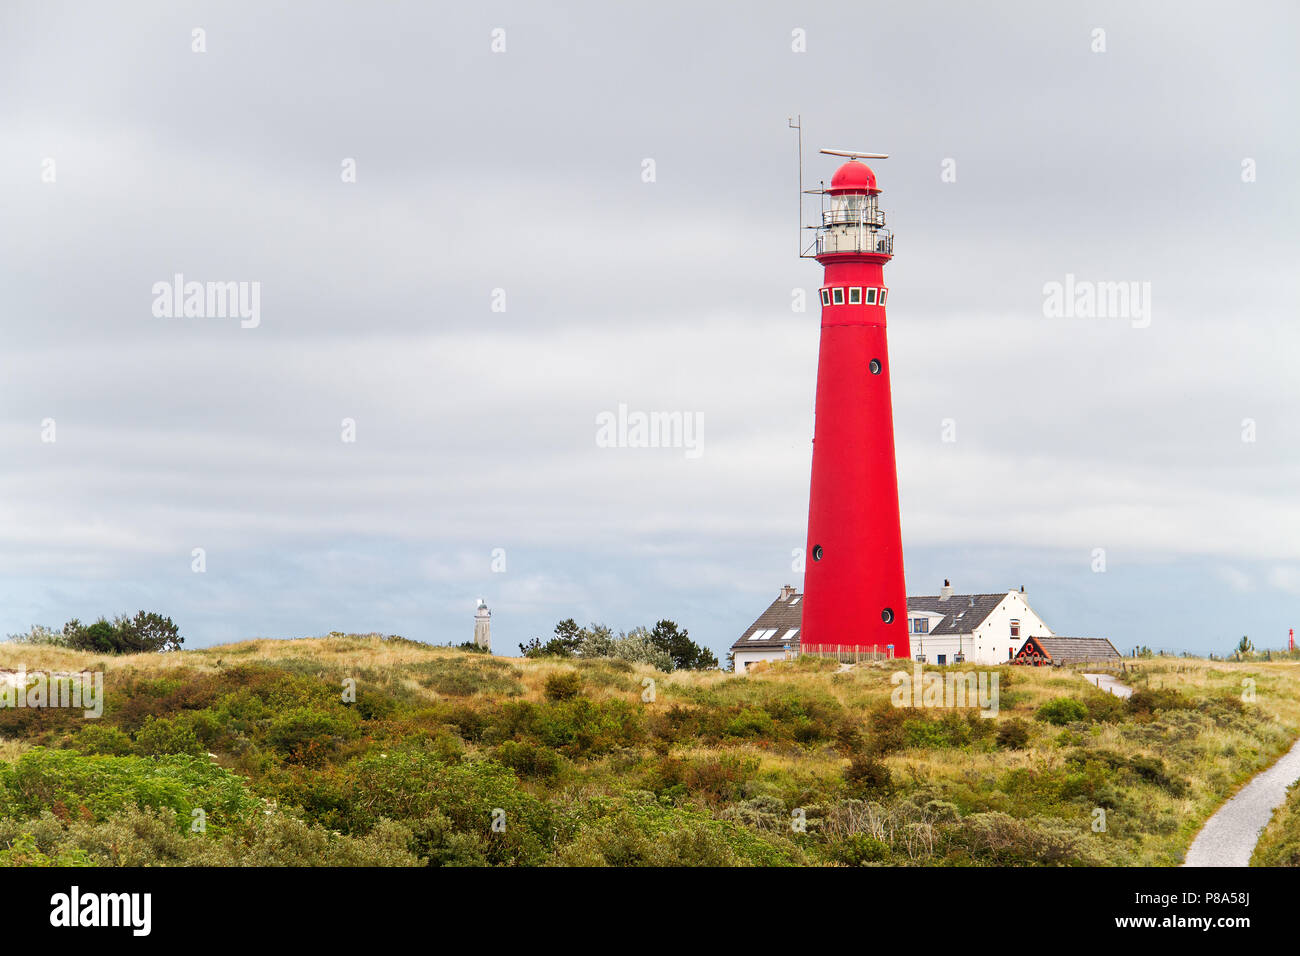 Red lighthouse in the dunes of the Dutch island Schiermonnikoog, next to it the white house of the keeper, in the distance a second lighthouse Stock Photo